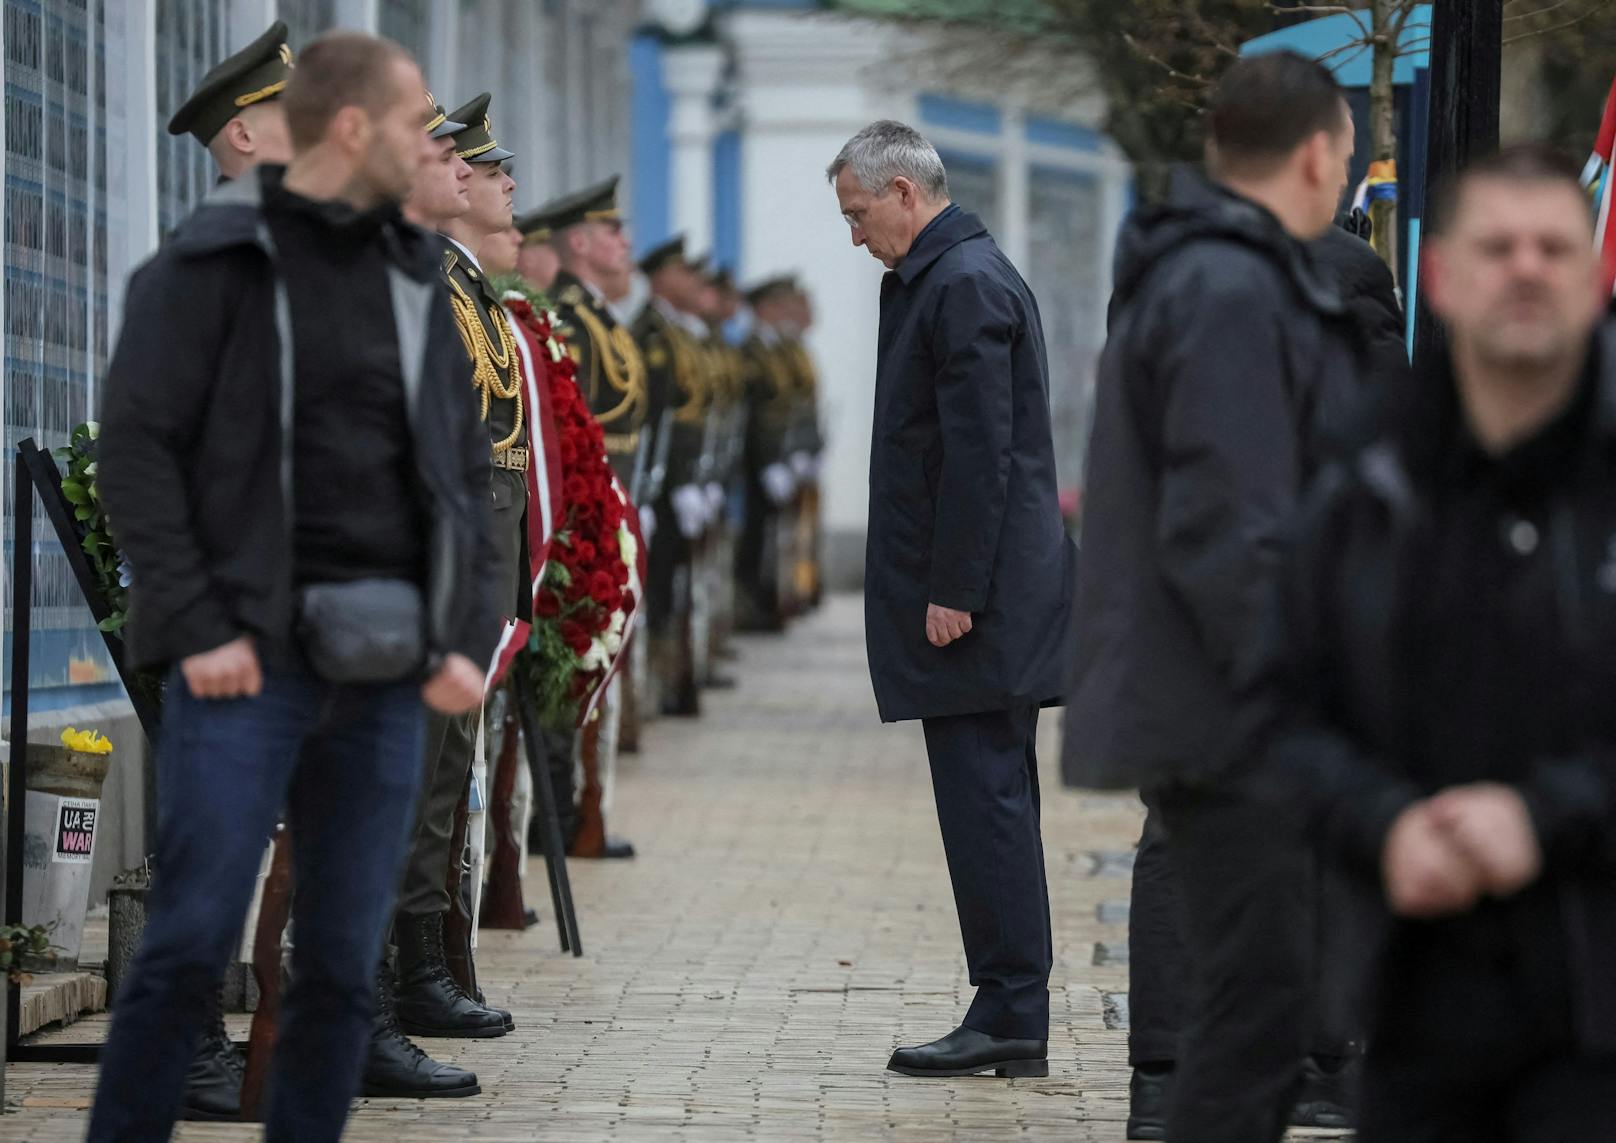 NATO Secretary-General Jens Stoltenberg visits the Wall of Remembrance to pay tribute to killed Ukrainian soldiers, amid Russia's attack on Ukraine, in Kyiv, Ukraine April 20, 2023. REUTERS/Gleb Garanich